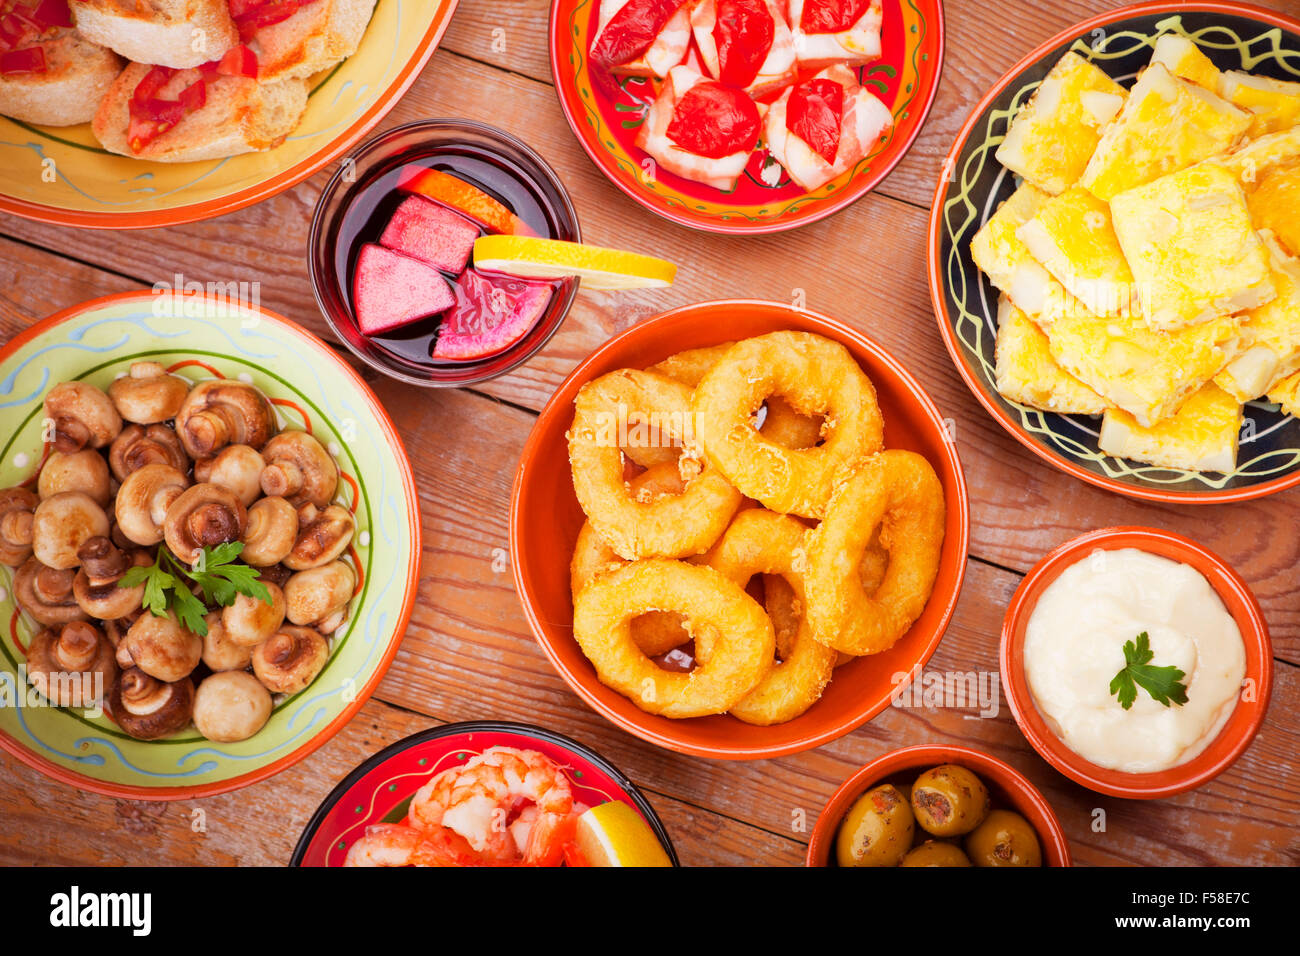 A table filled with all sorts of Spanish tapas and sangria. Stock Photo